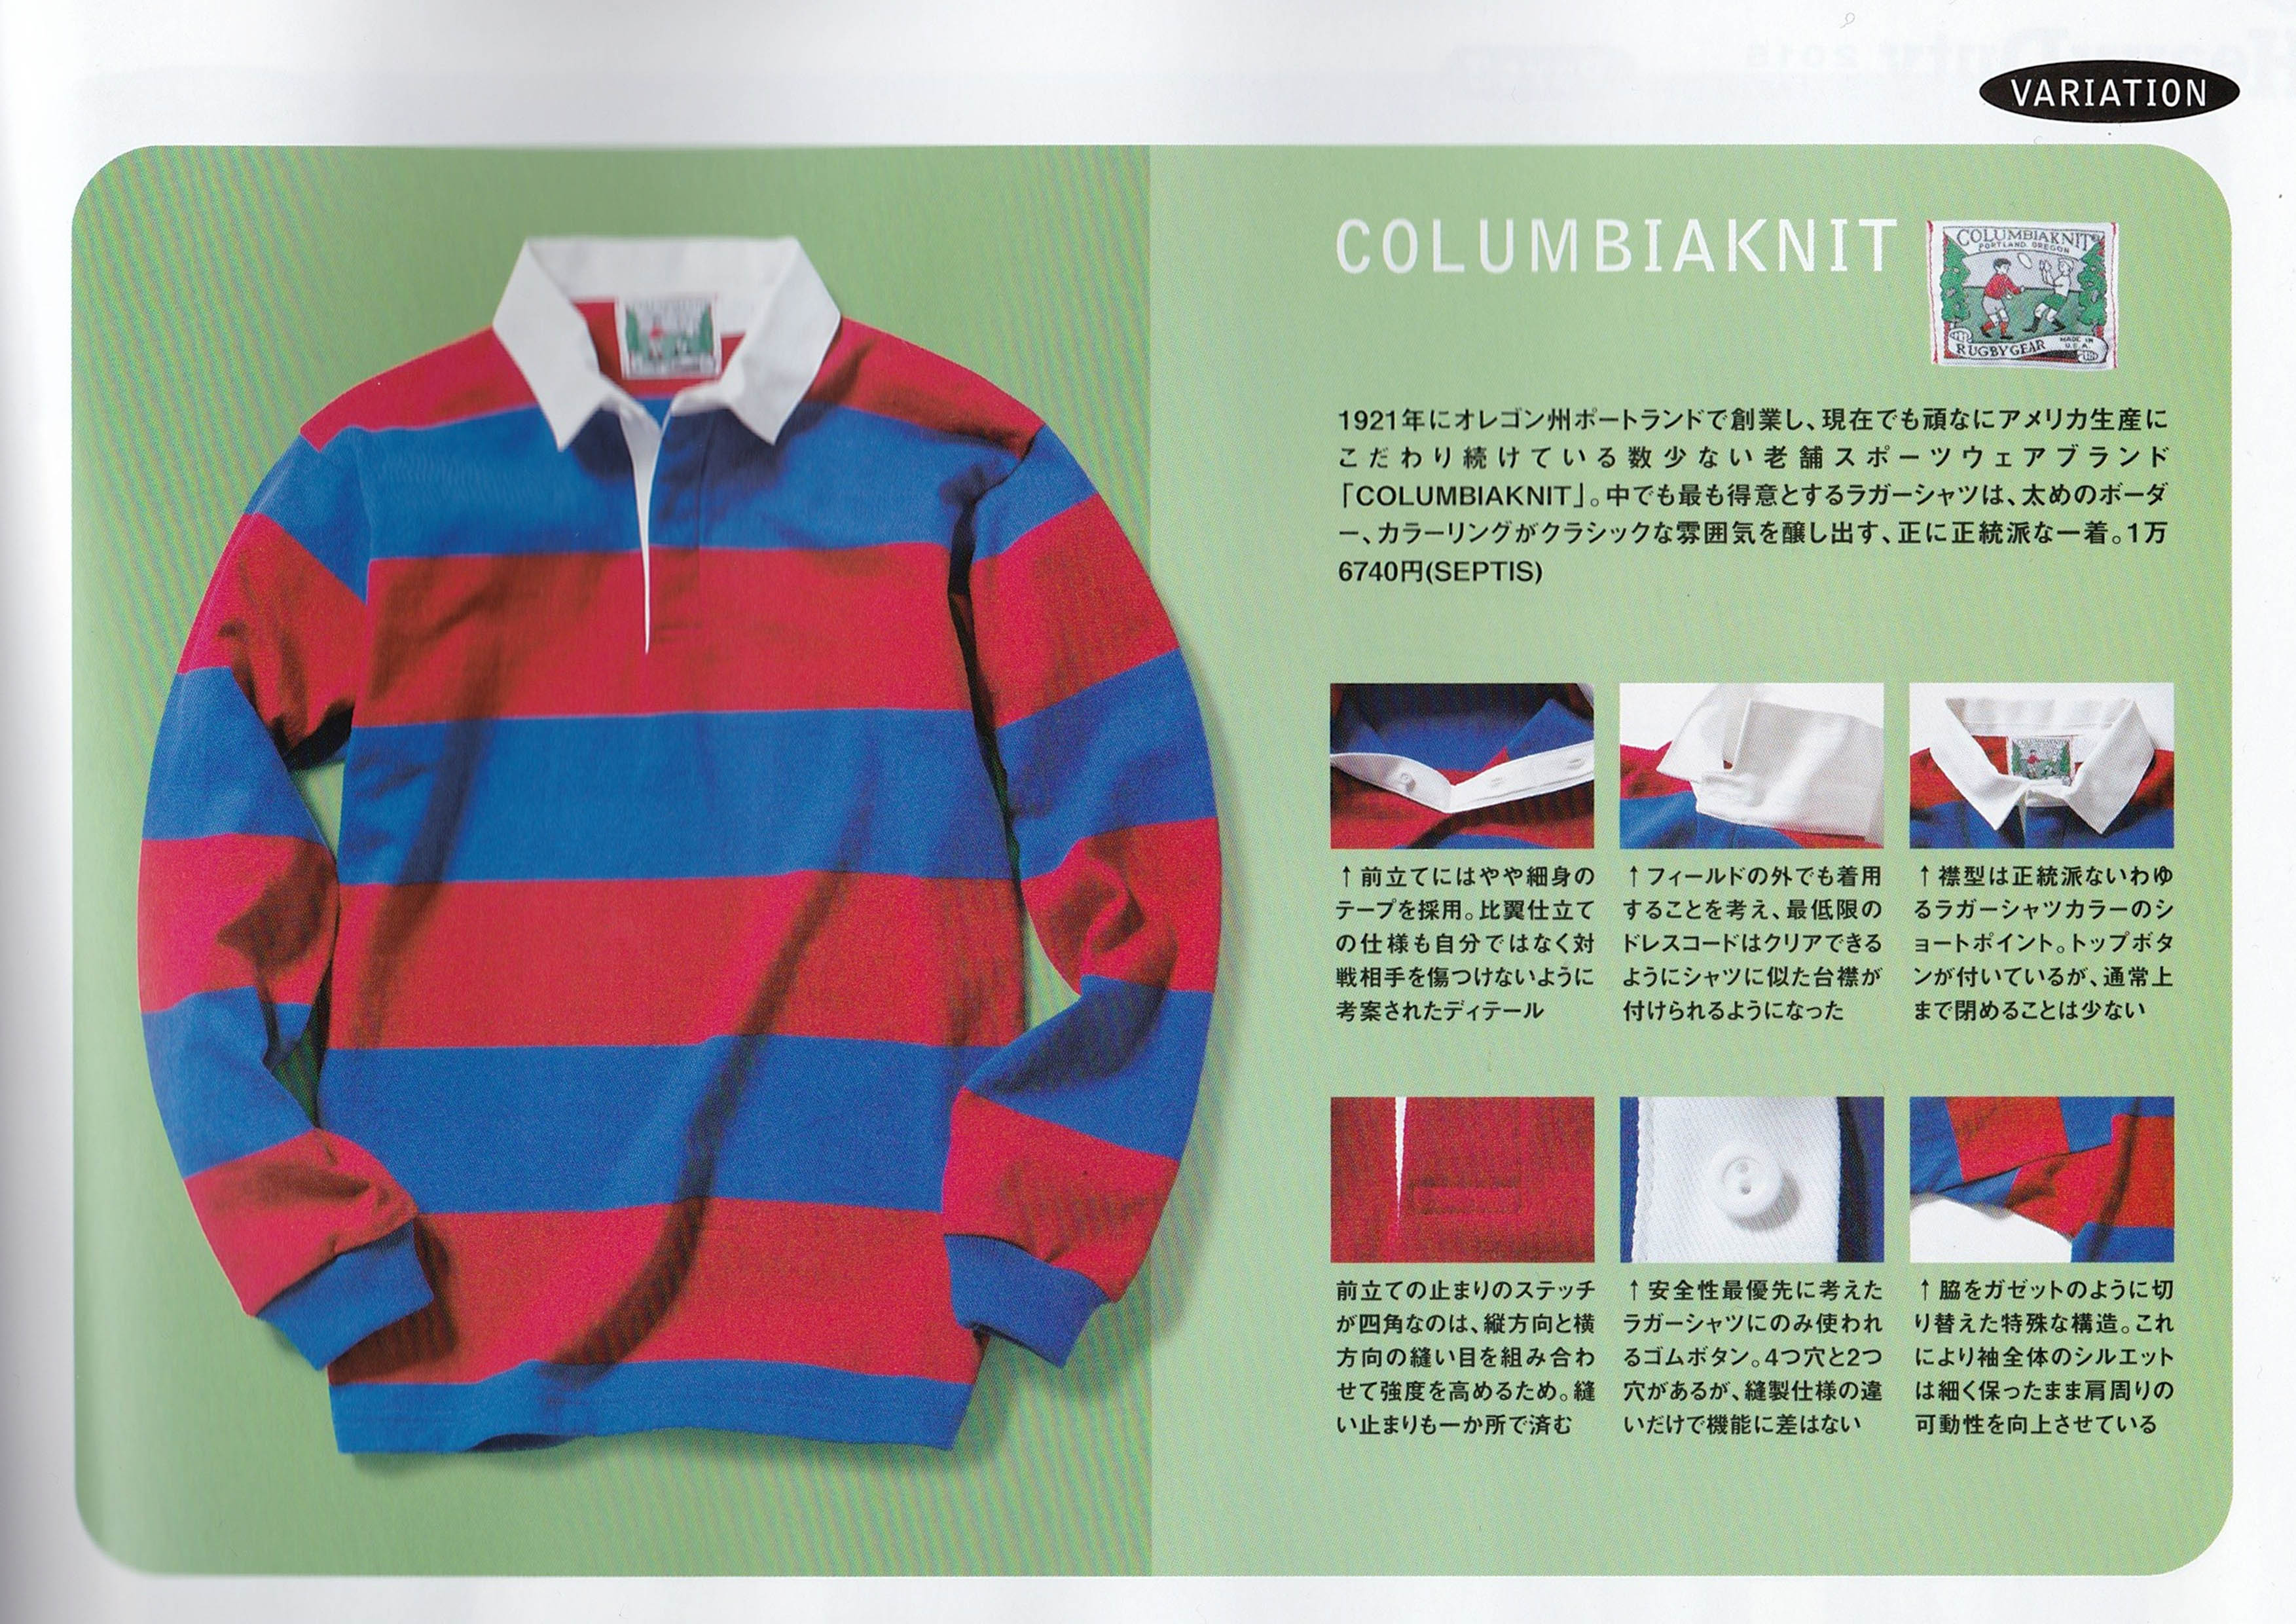 COLUMBIA KNIT コロンビアニット RUGBY SHIRT ラグビーシャツ MADE IN 